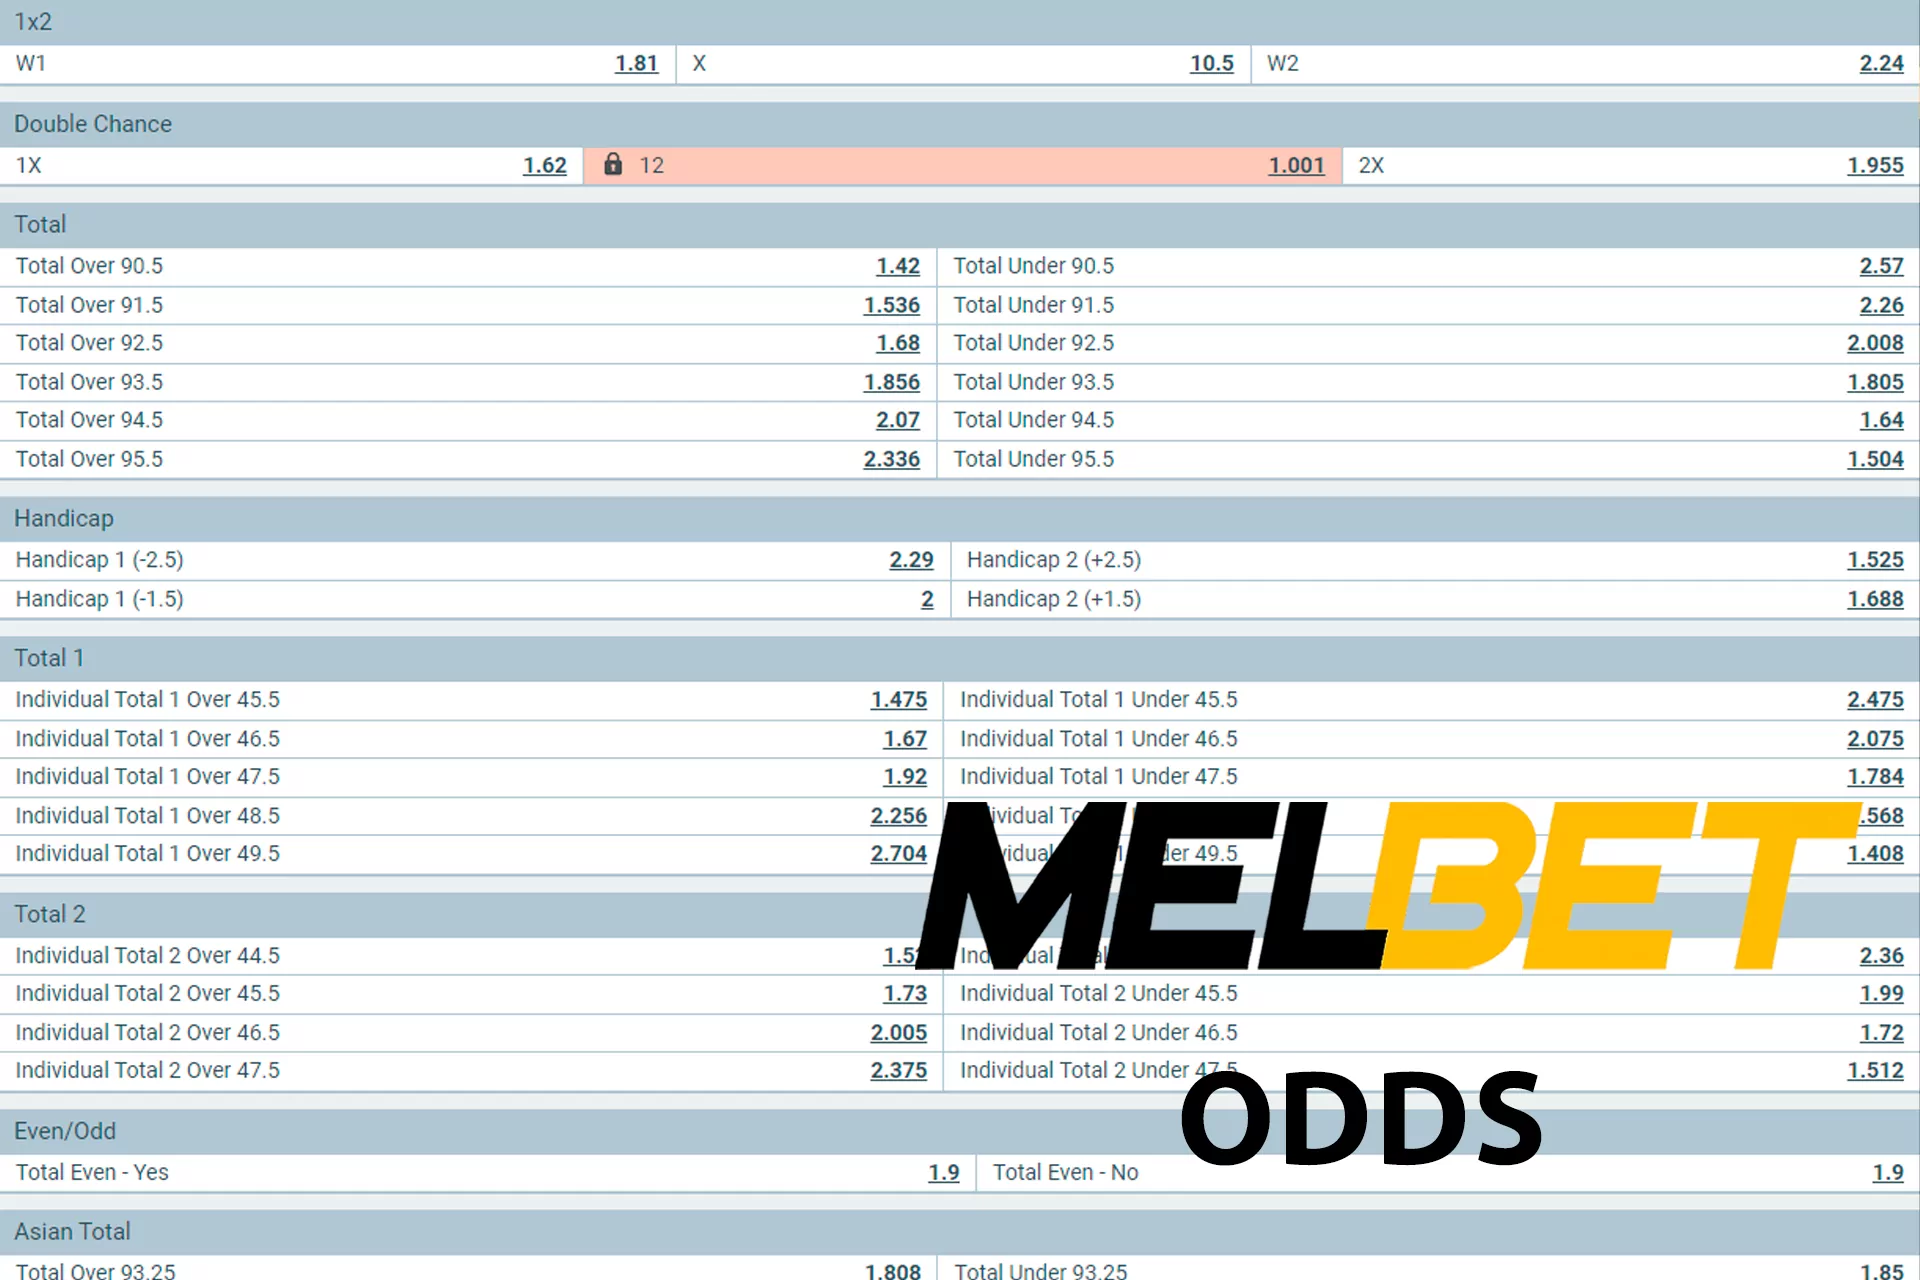 Melbet has high odds for sports betting.